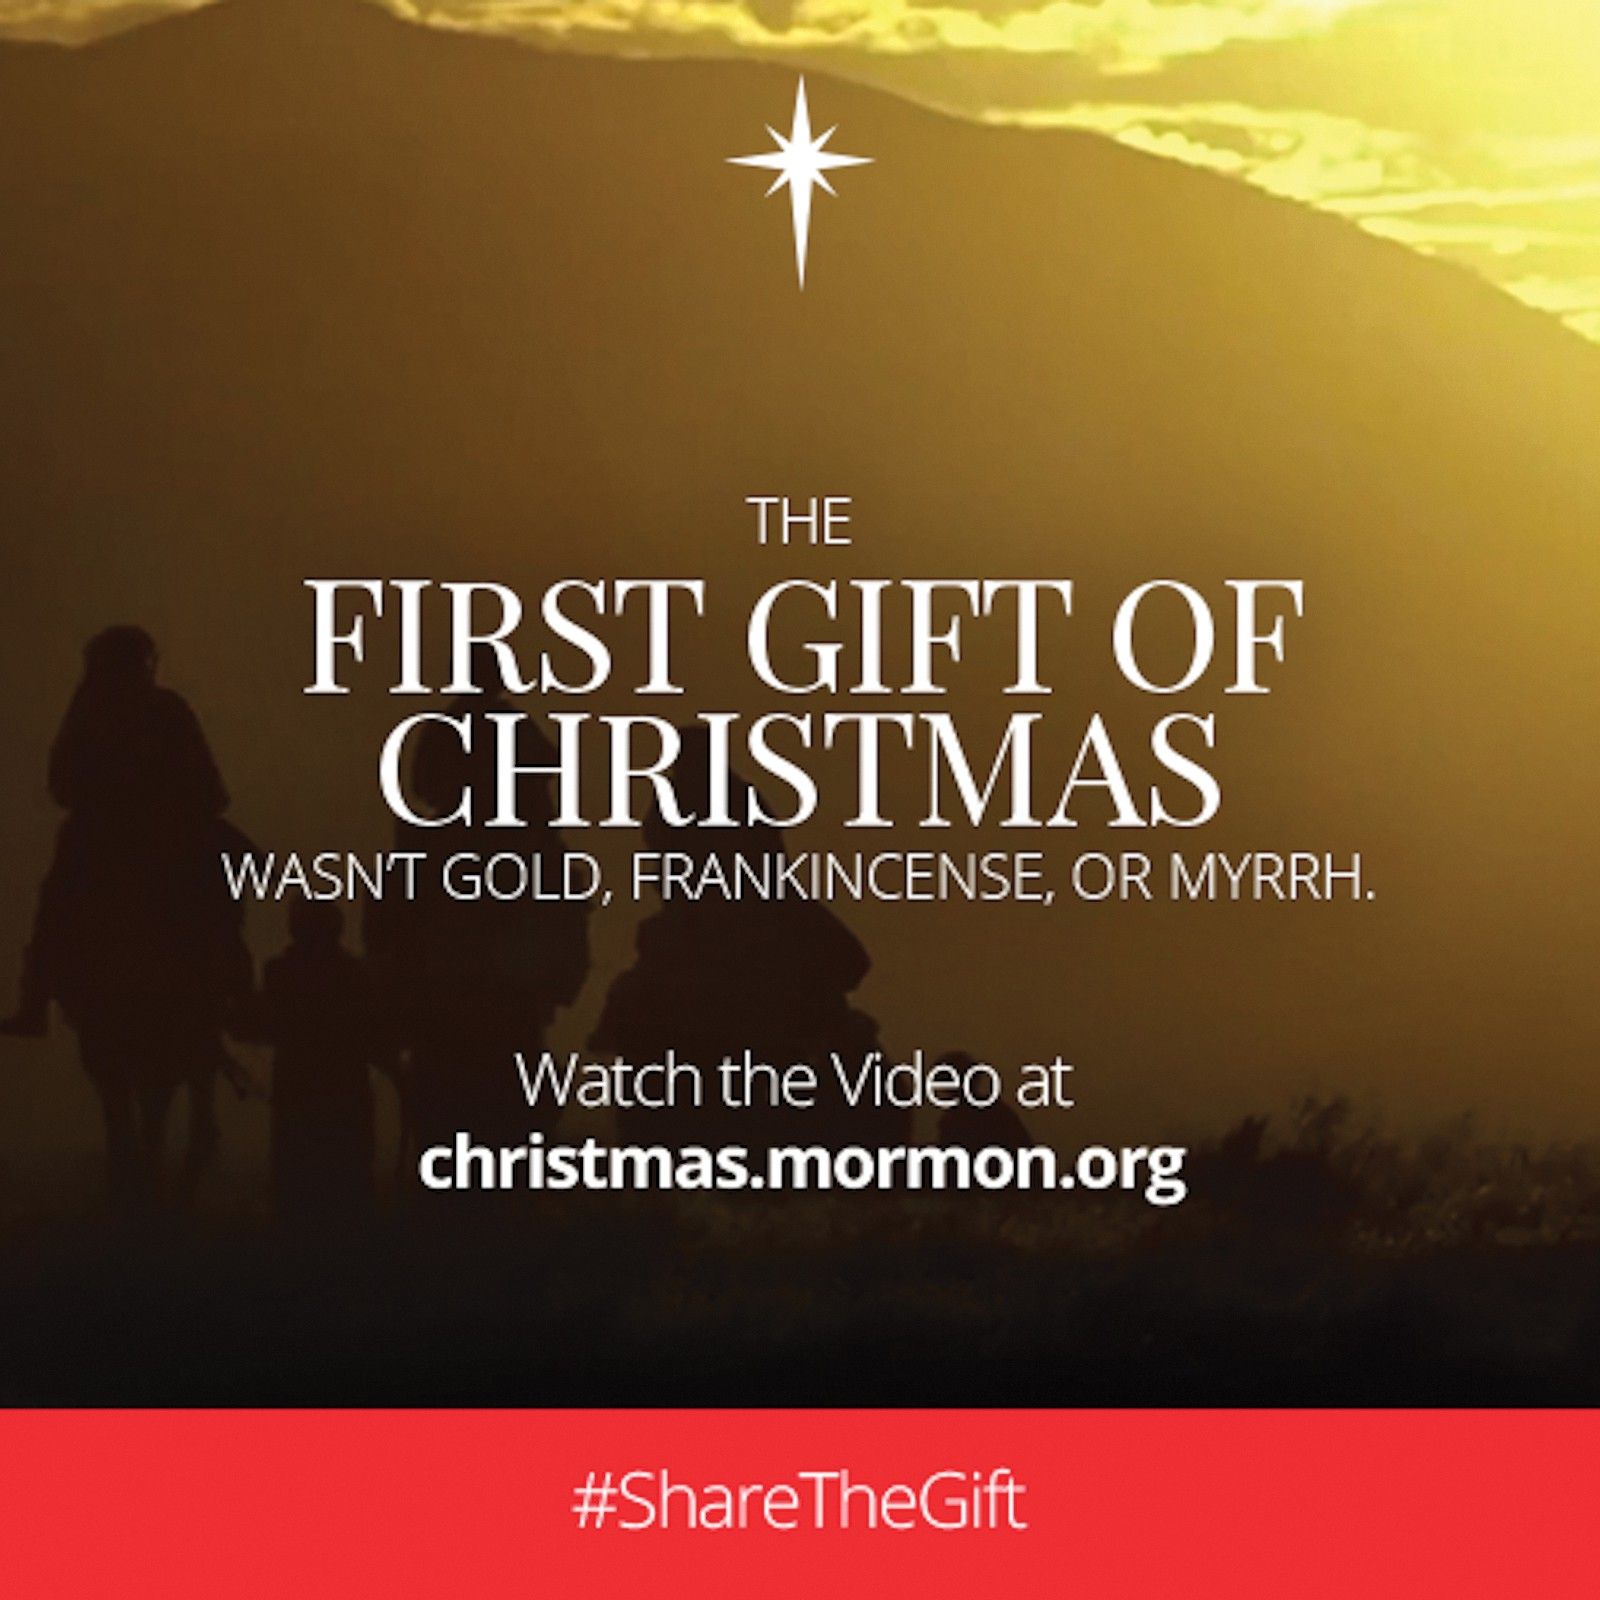 The first gift of Christmas wasn’t gold, frankincense, or myrrh. Watch the video at christmas.mormon.org. #ShareTheGift